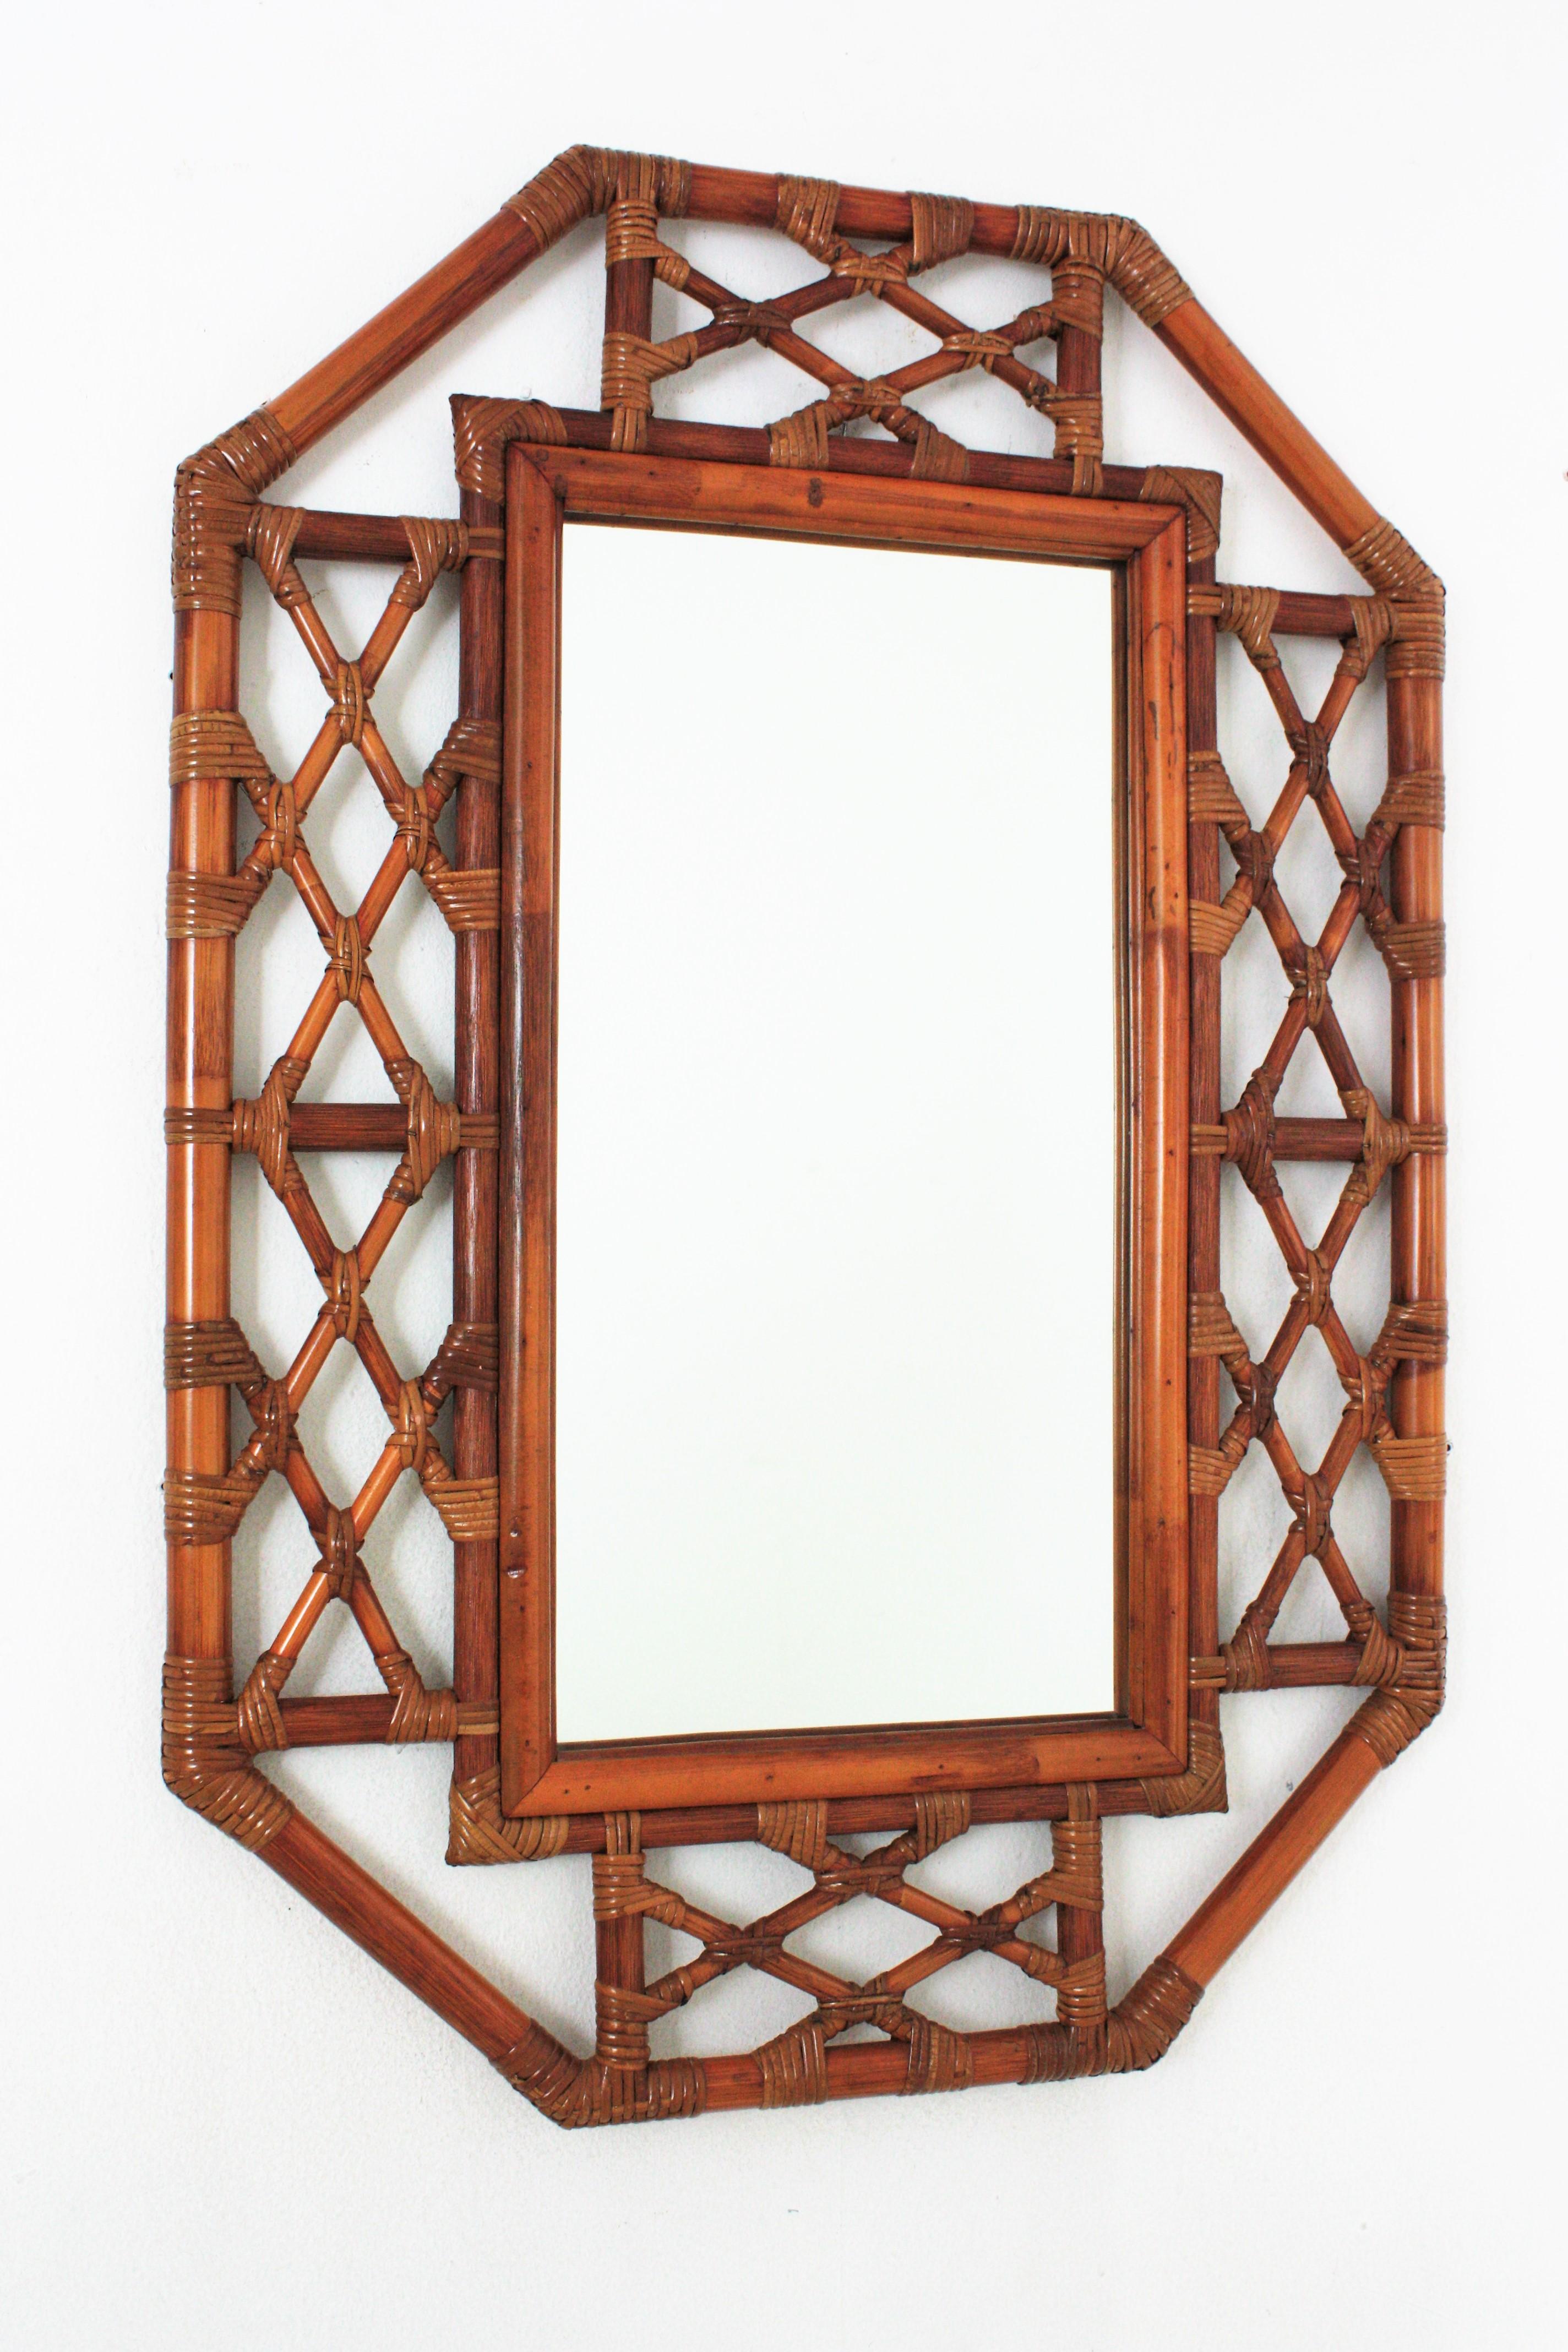 Spanish Mid-Century Modern Bamboo Chinoiserie Tiki style octagonal wall mirror. Spain, 1960s.
Gorgeous oriental inspired mirror handcrafted with bamboo and rattqan canes. It has a highly decorative frame with an intrincate of rattan decorations and